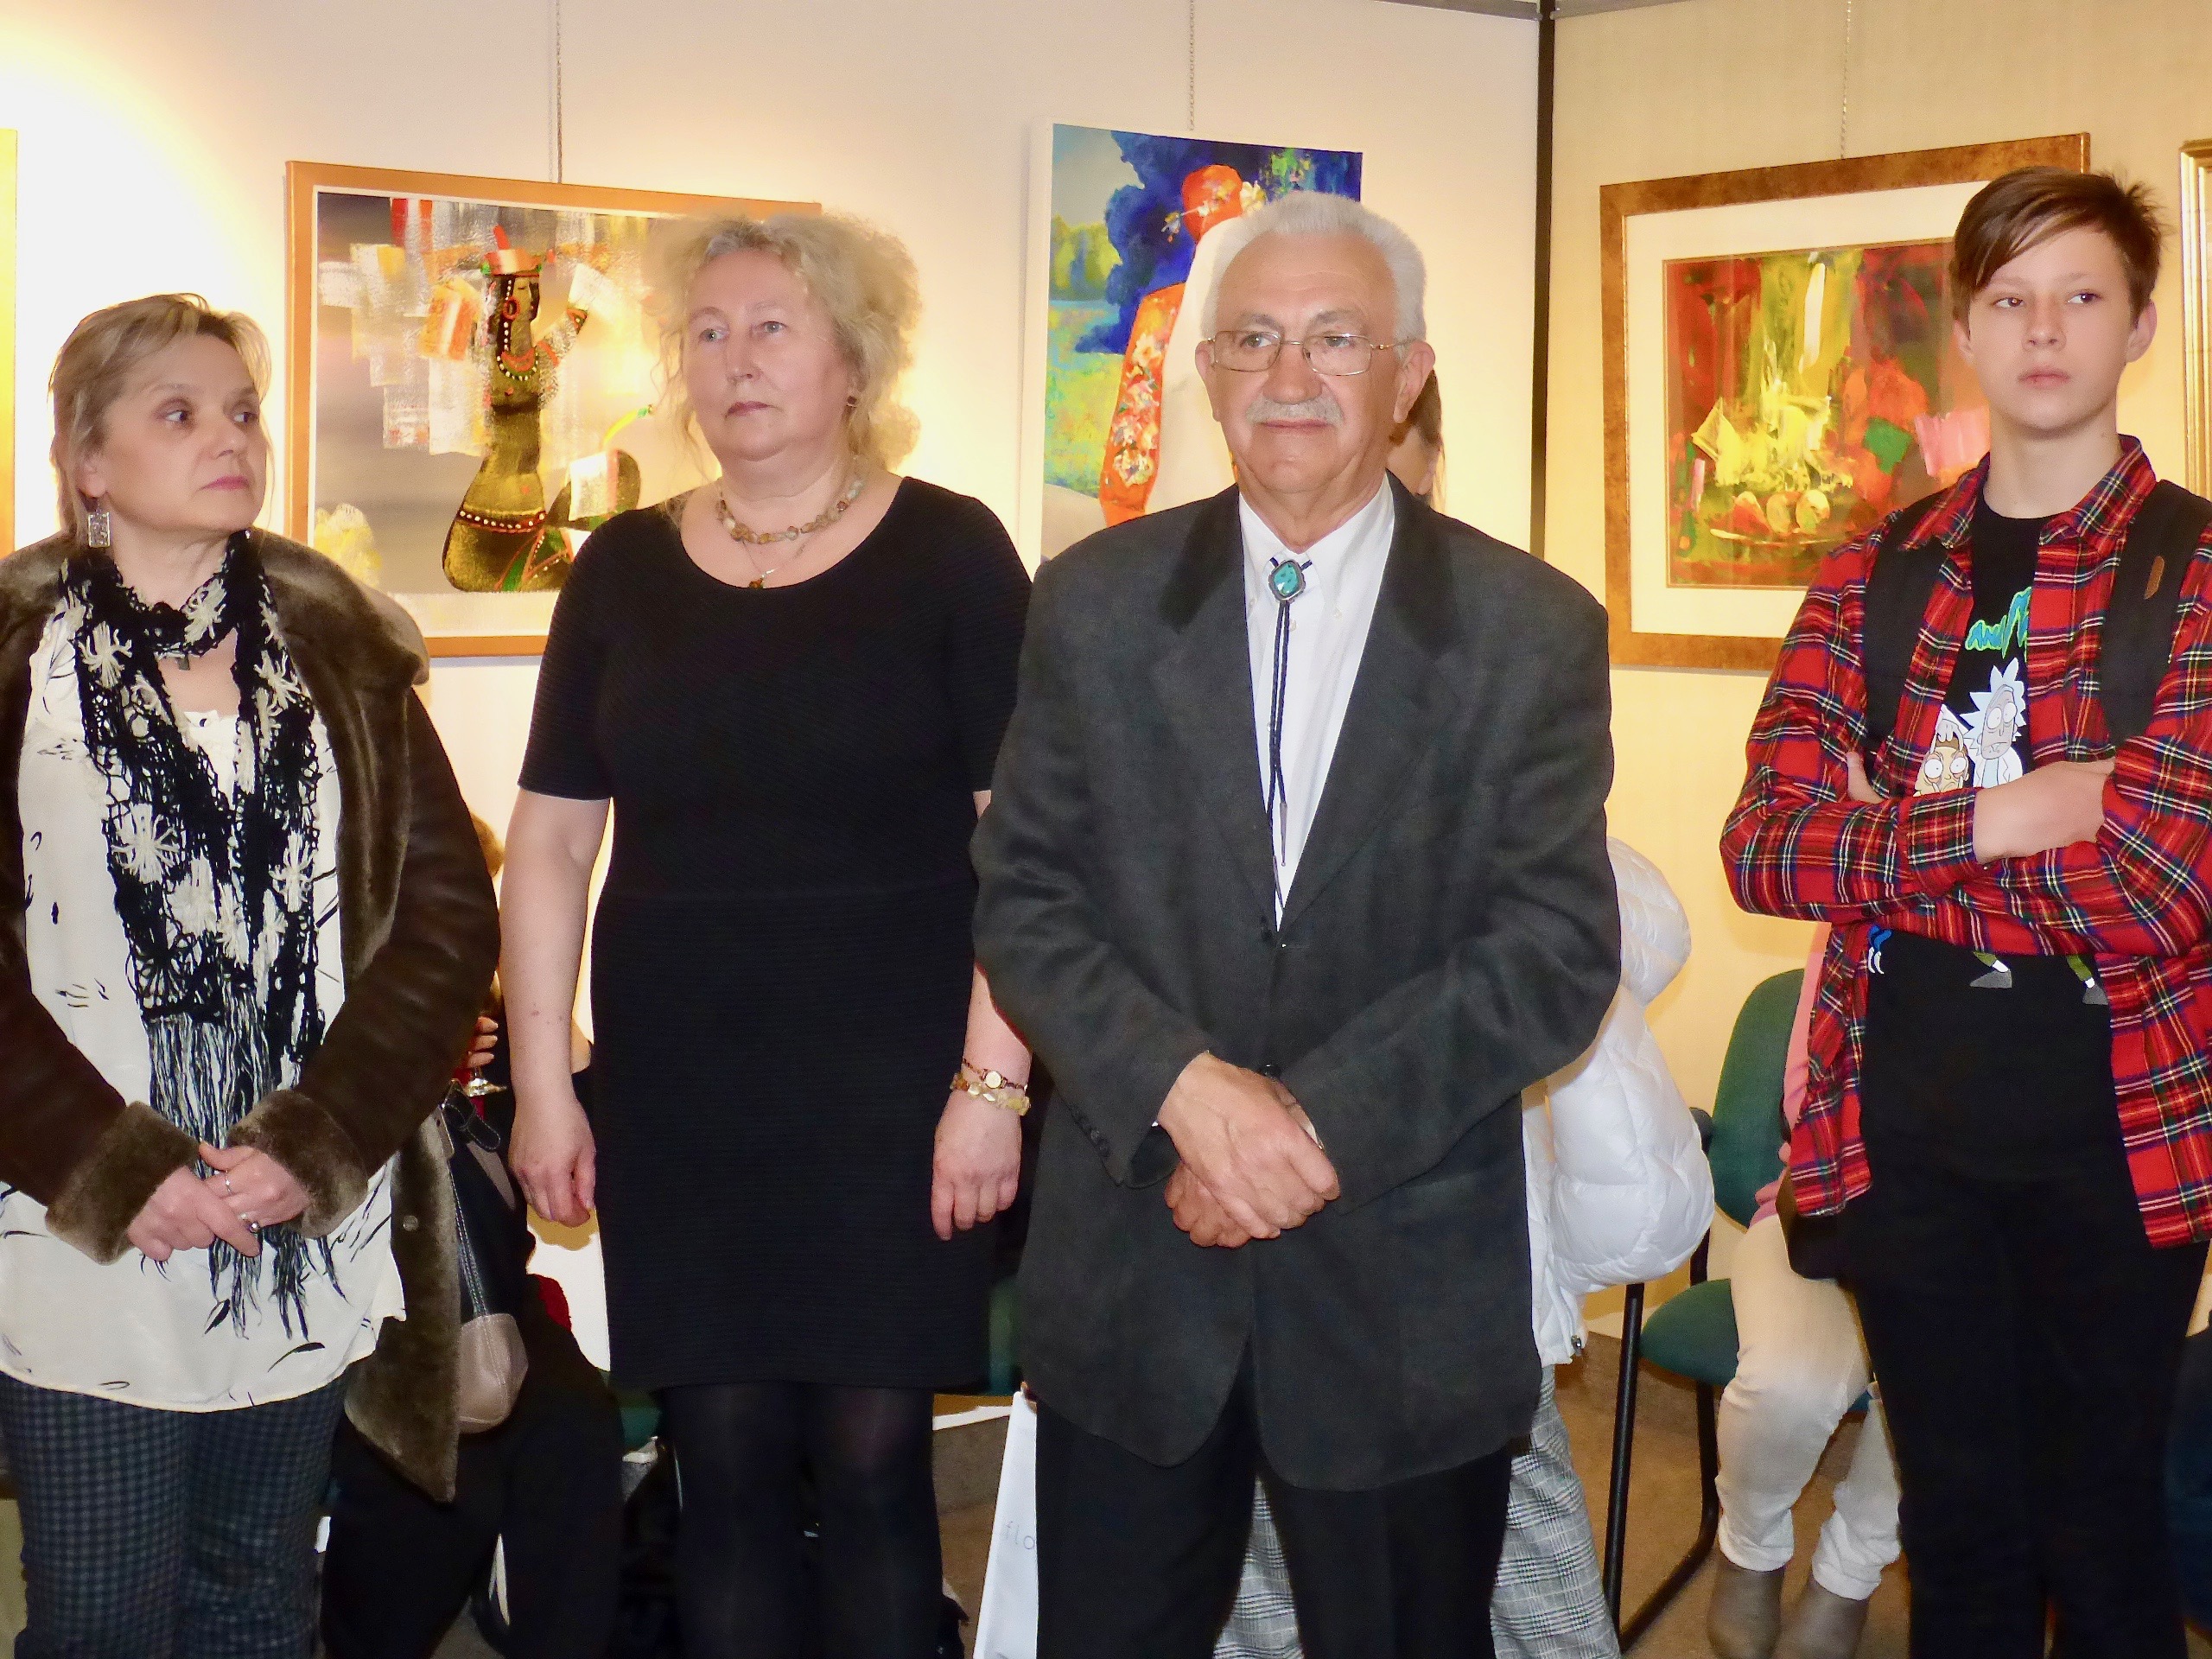 Legends of Time: Exhibition of Paintings by Oleh Nedoshytko, Reception, April 7, 2019